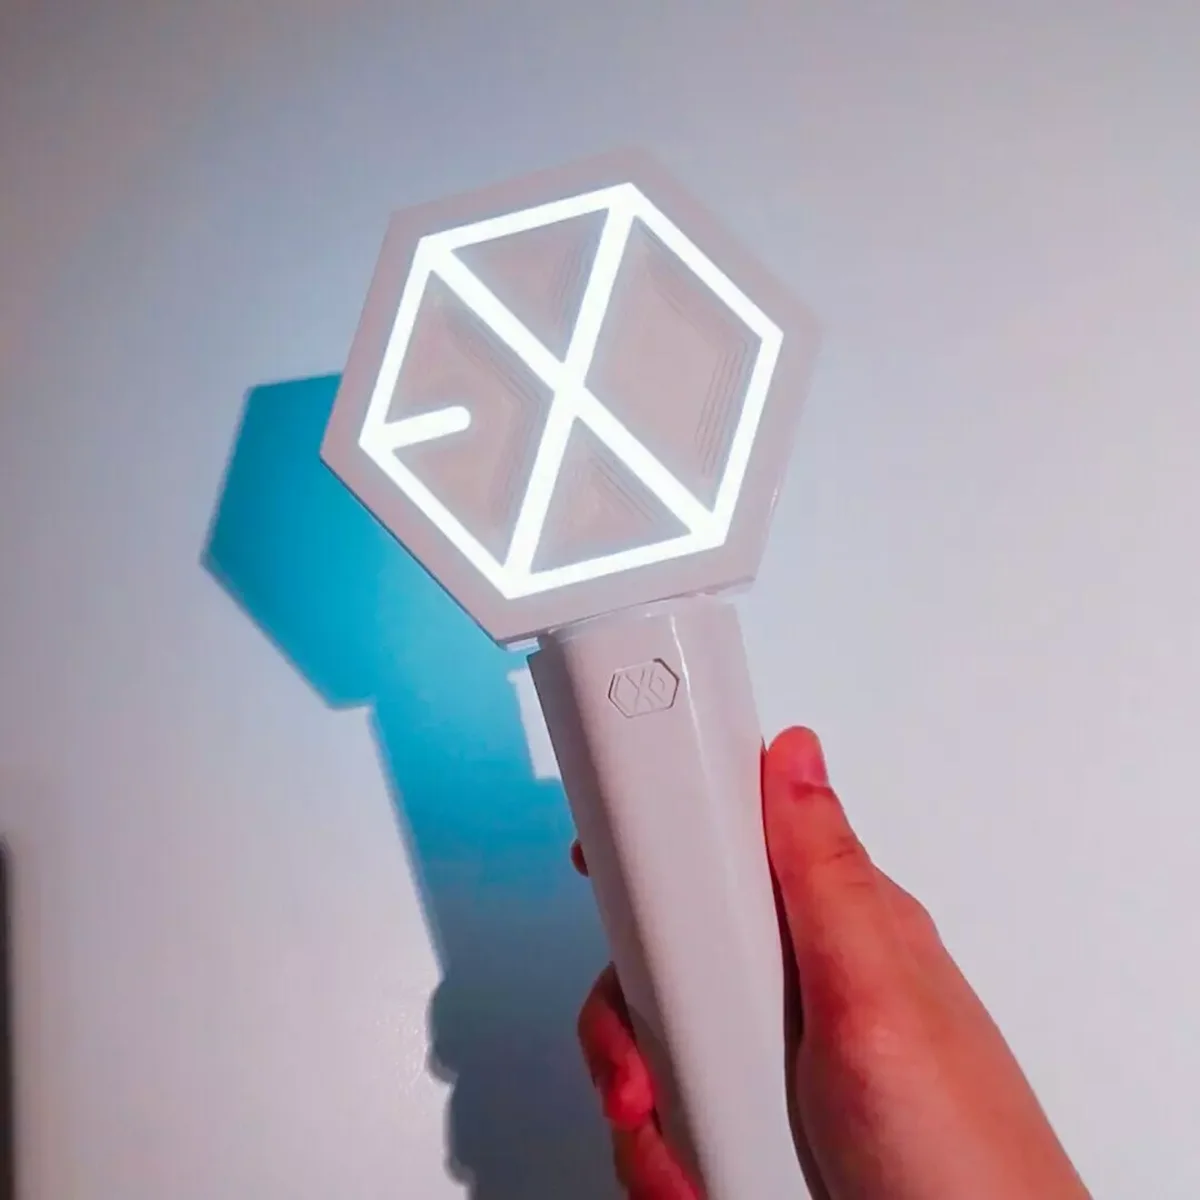 

Kpop EXO Concert Light Stick Sehun Fans Supporting Glow Lightstick Kpop Gift Collection Action Figure Toy Events Party Supplies